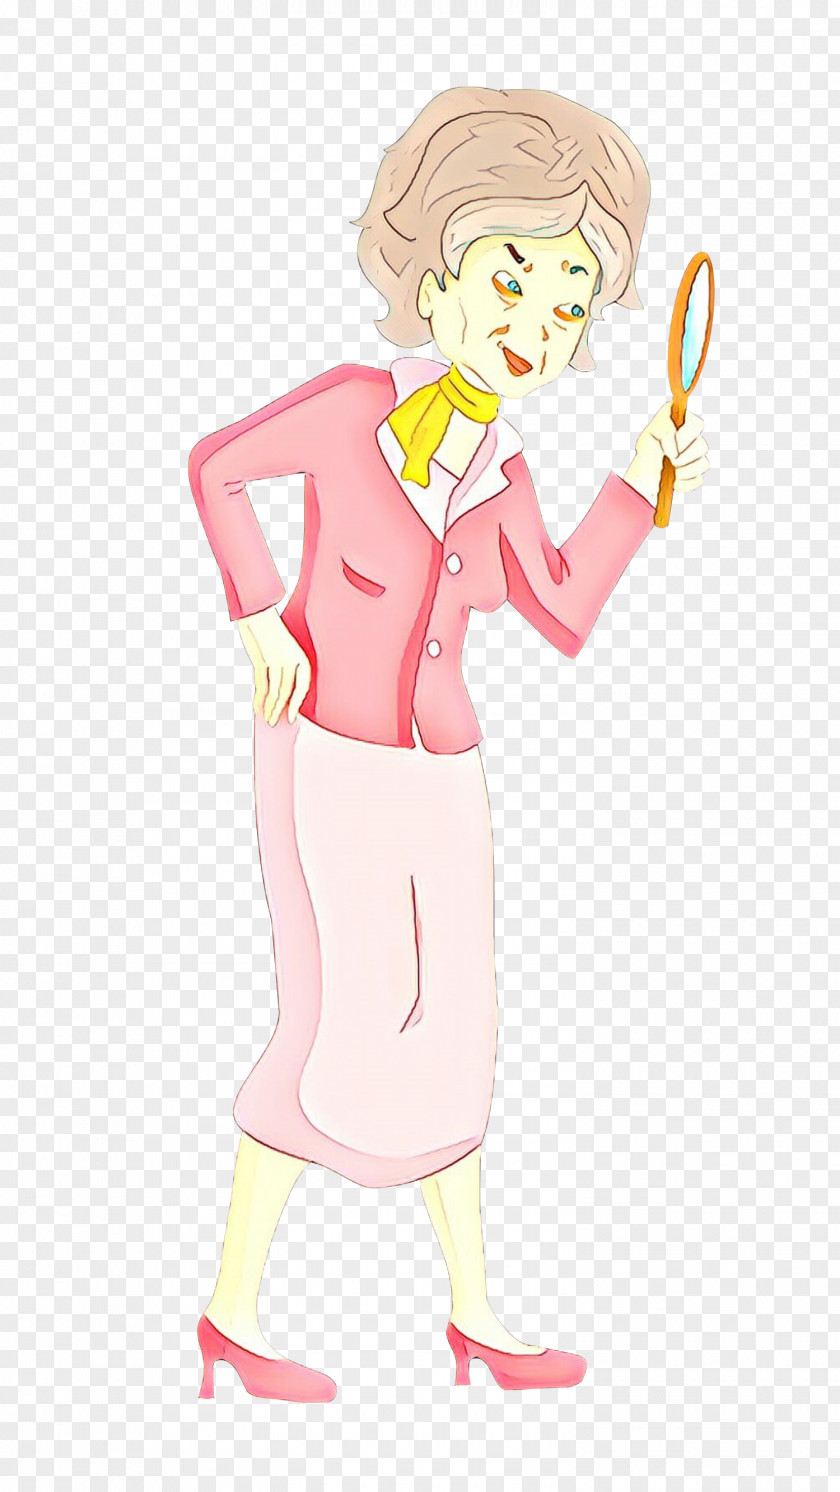 Pink Lady Style Cartoon Fashion Illustration Costume Design Fictional Character PNG